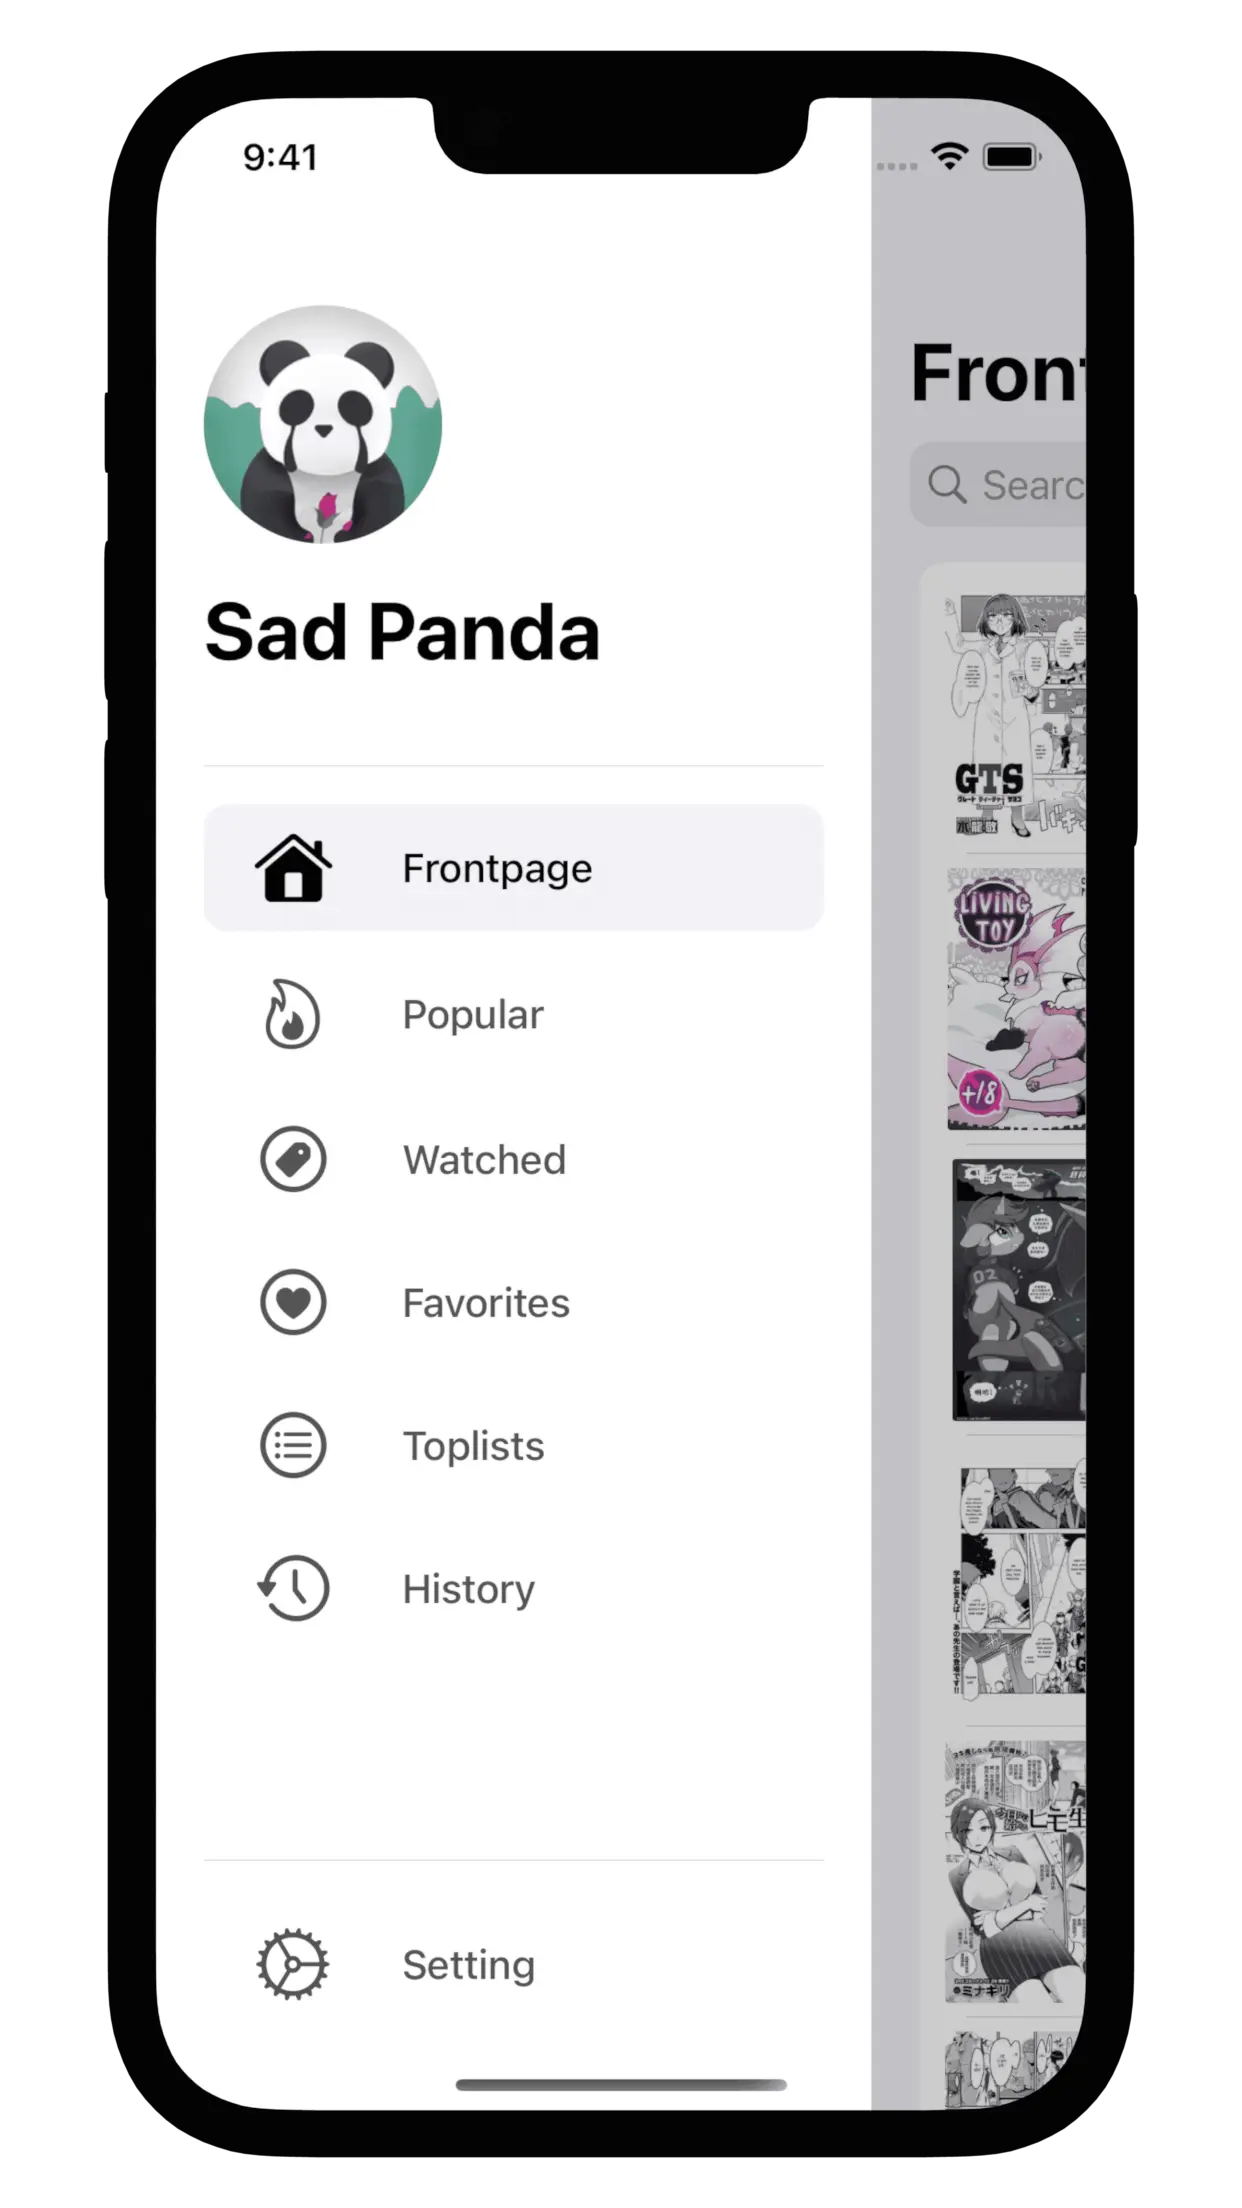 andy seaman recommends hentai app for iphone pic